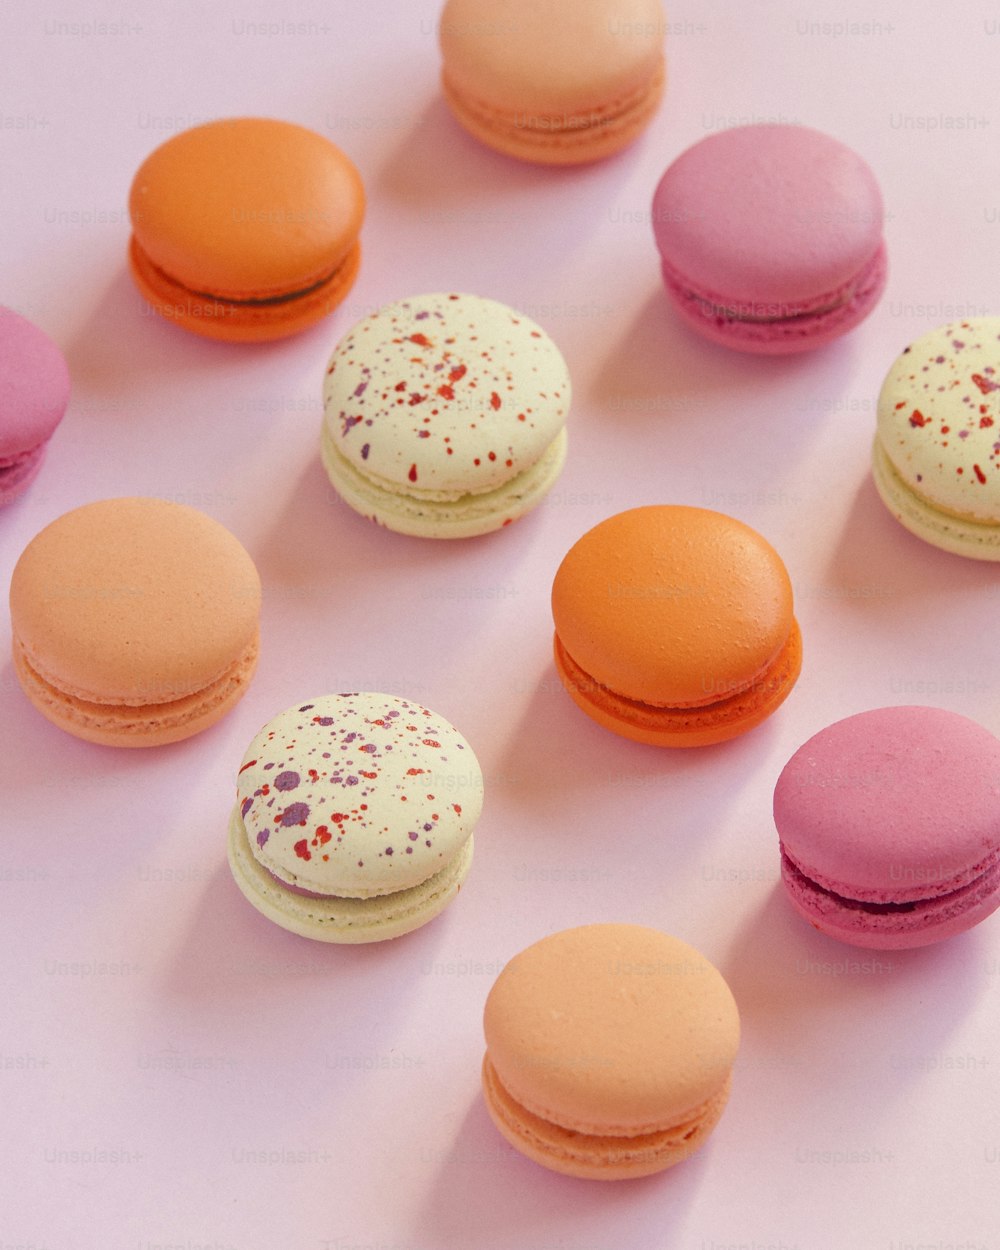 a group of macaroons sitting on top of a pink surface